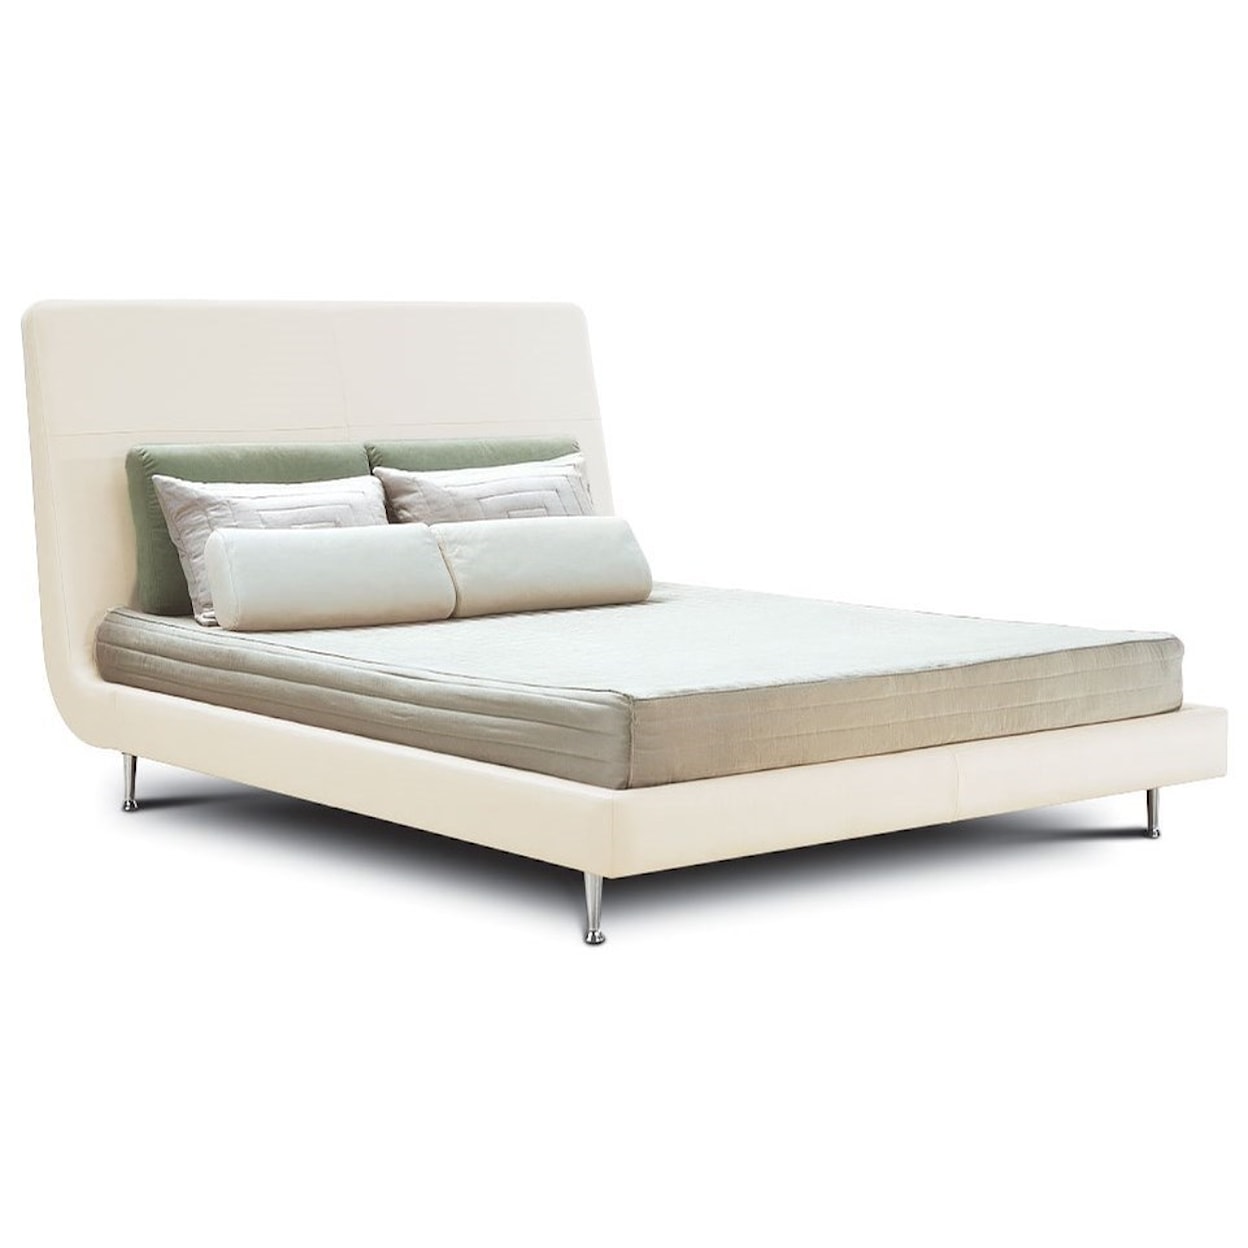 American Leather Menlo Park Bed Queen Upholstered Bed